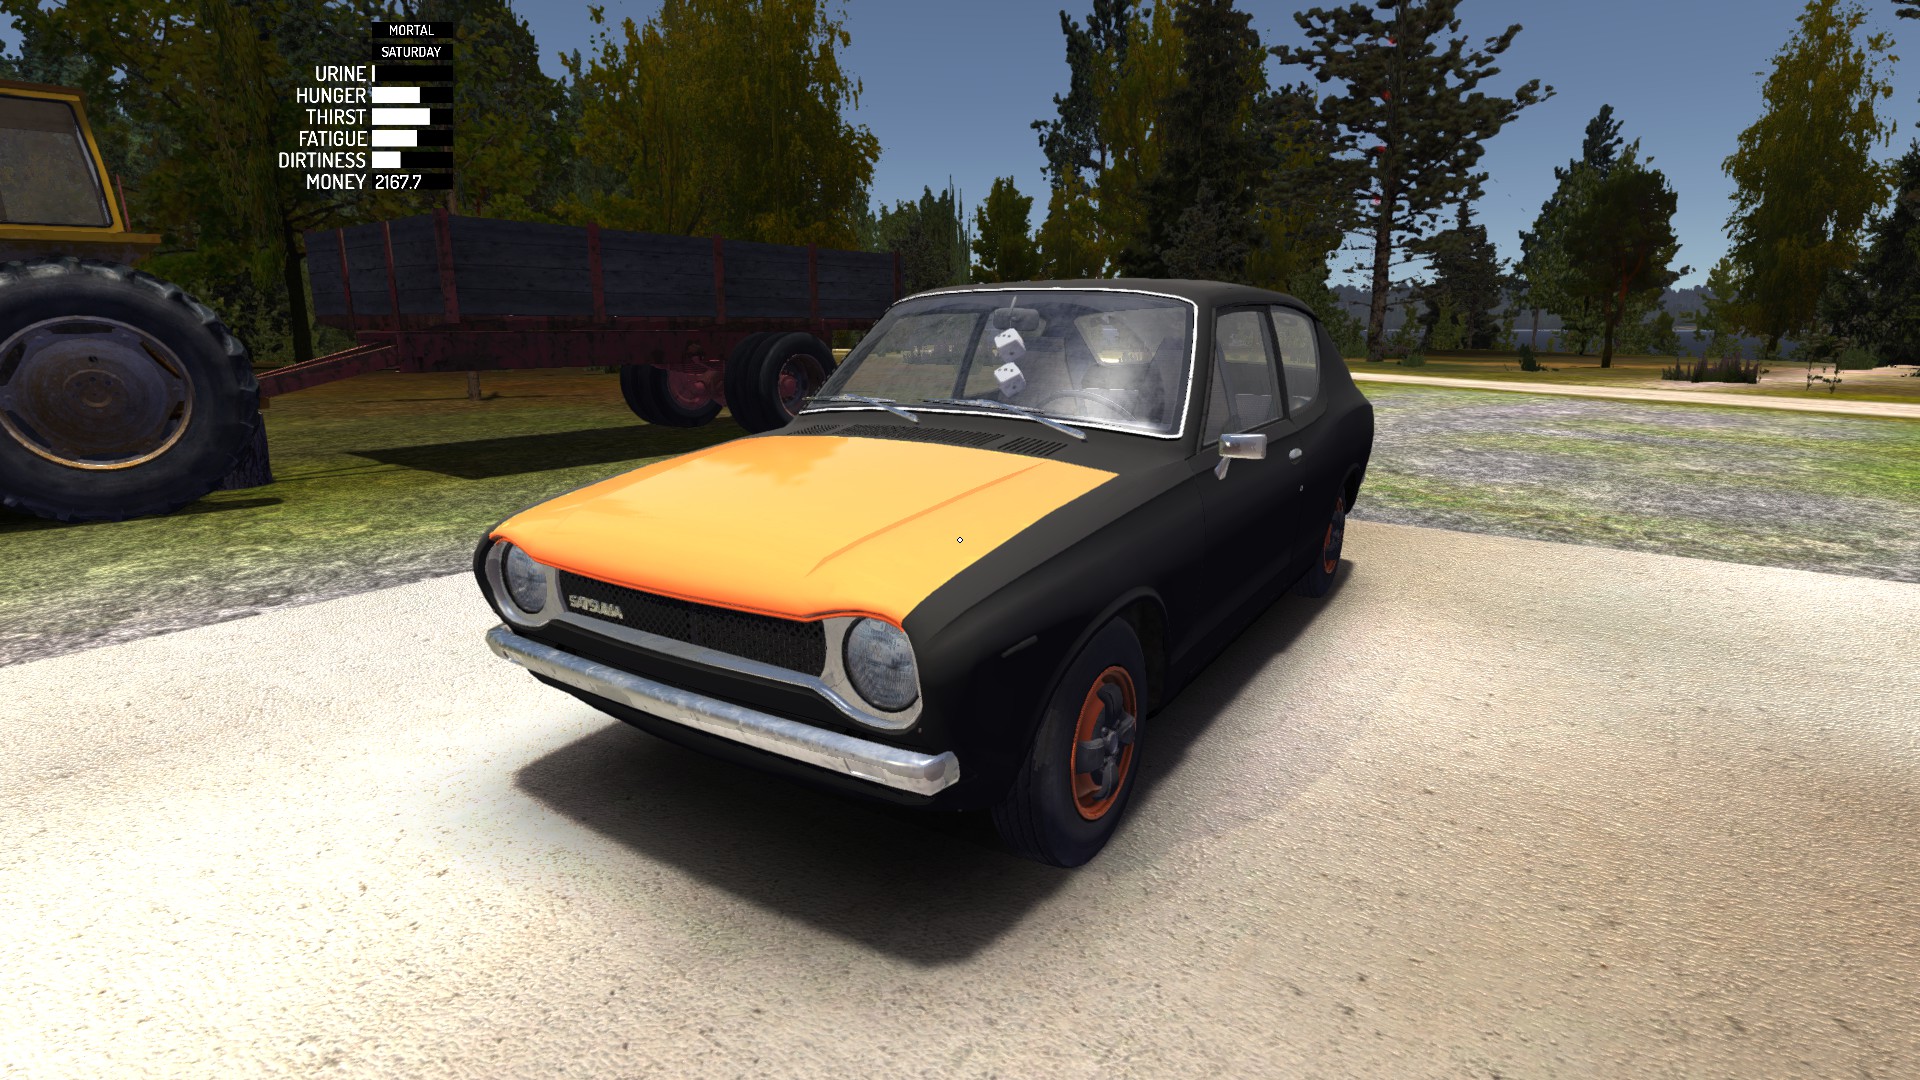 Steam Community :: Guide :: How to build your summer car